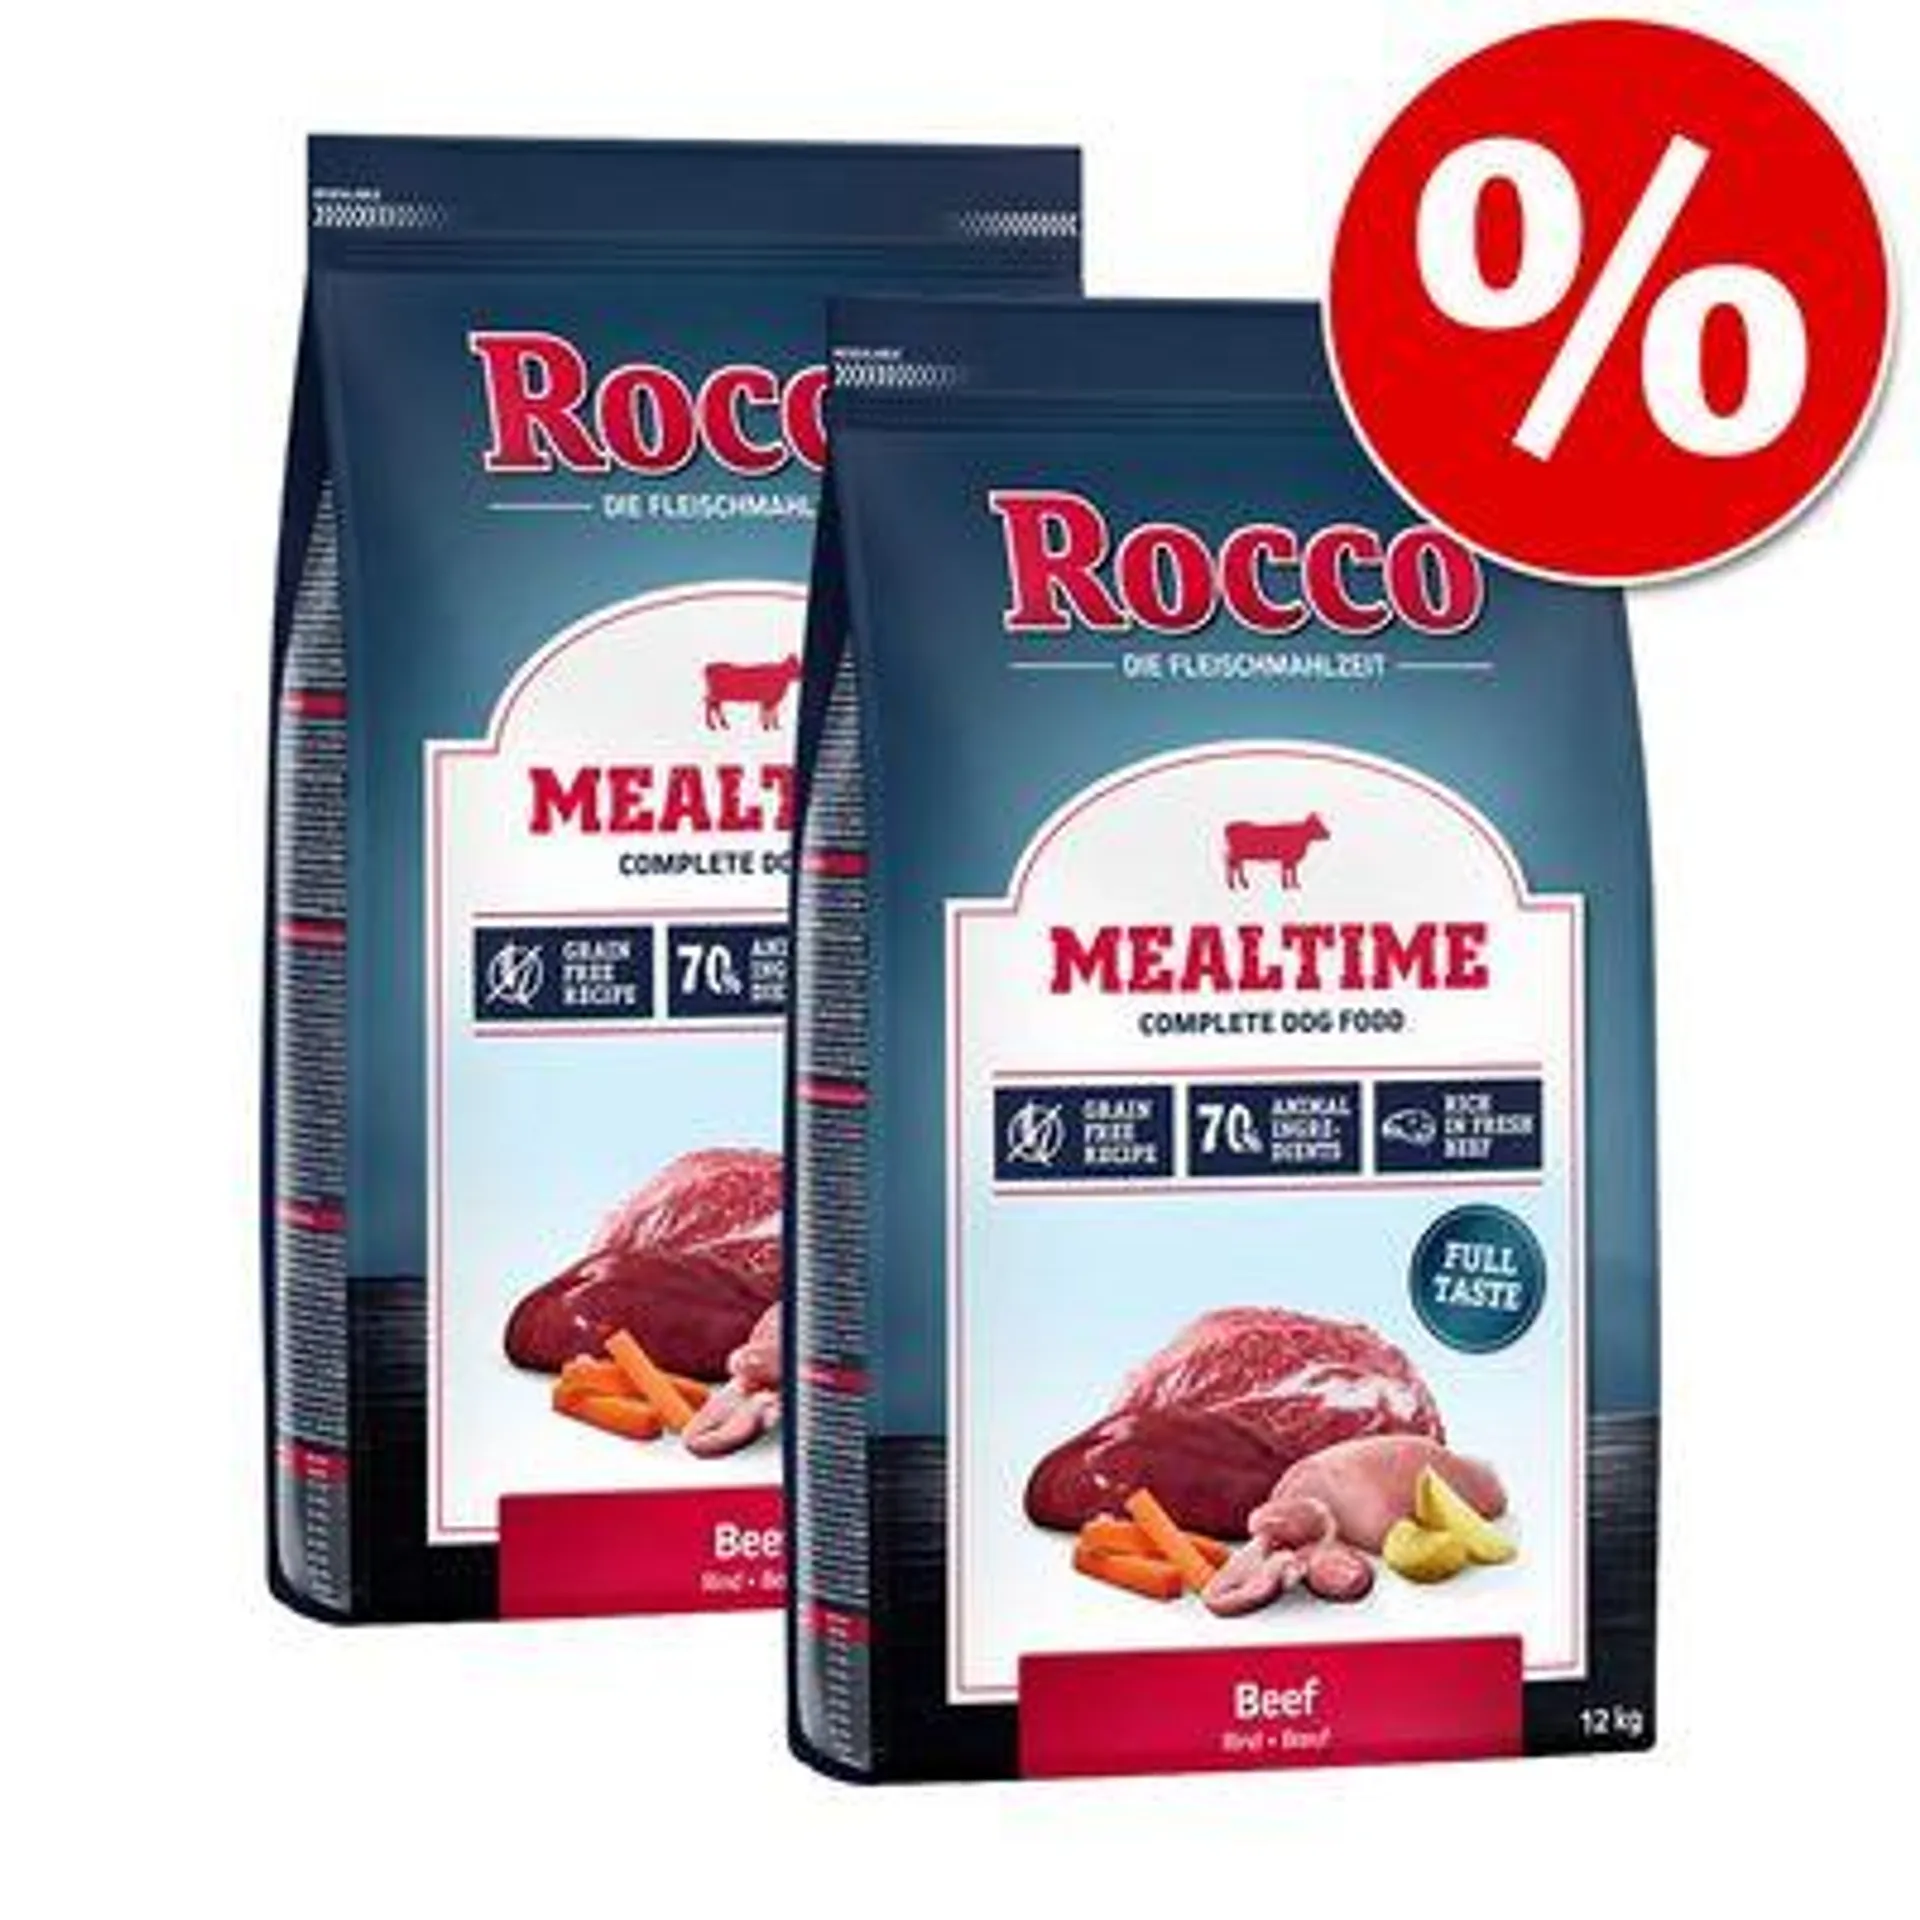 2 x 12kg Rocco Mealtime Dry Dog Food – Save £5!*